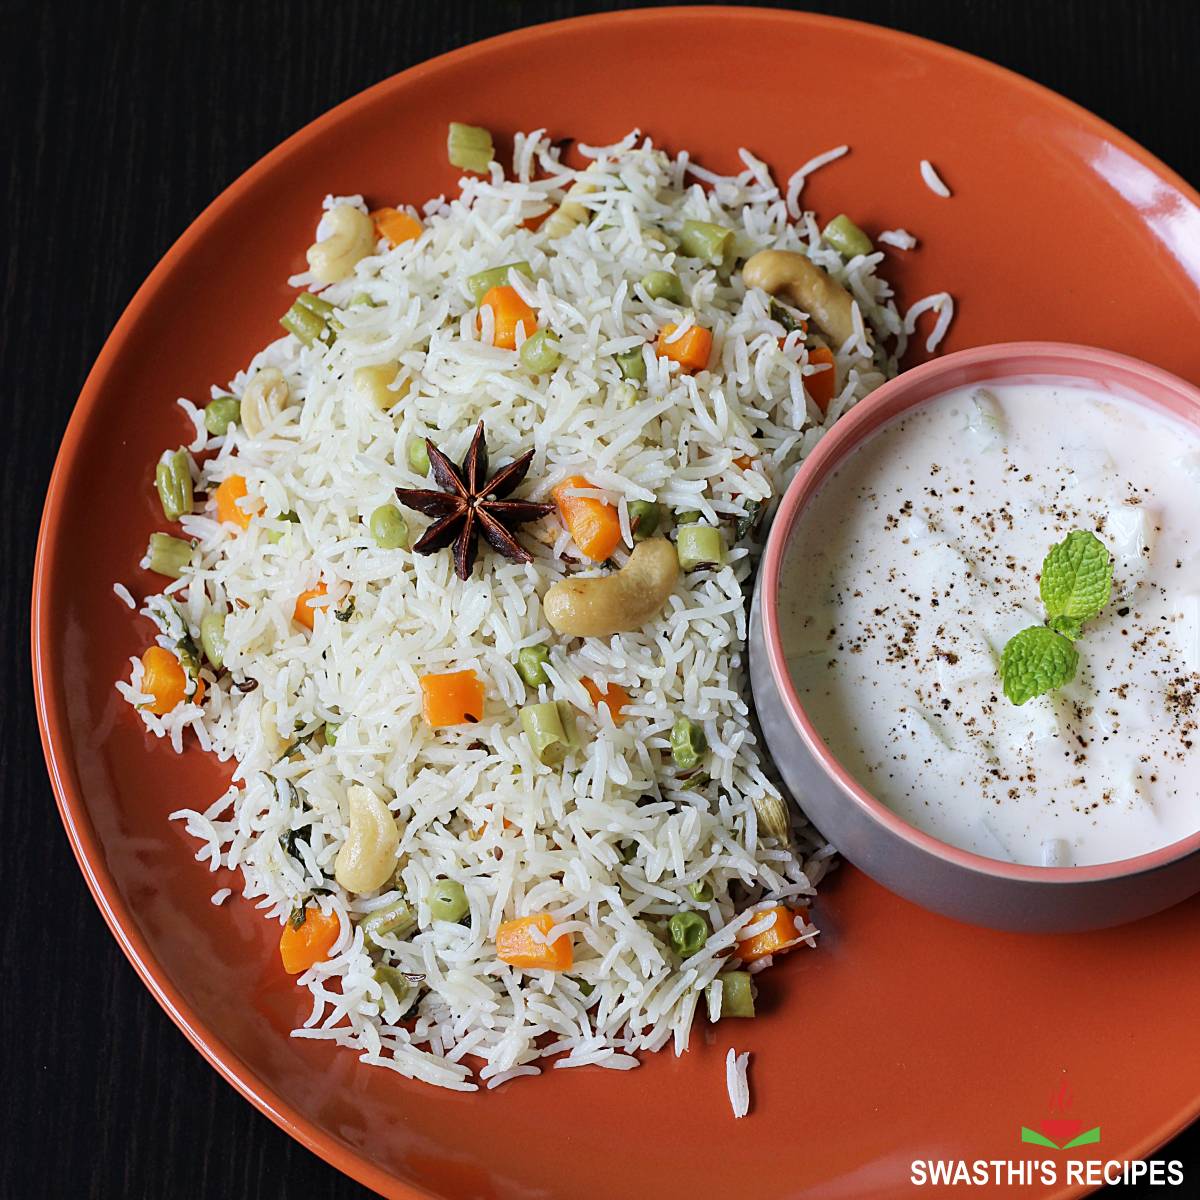 Coconut milk rice served in a red plate